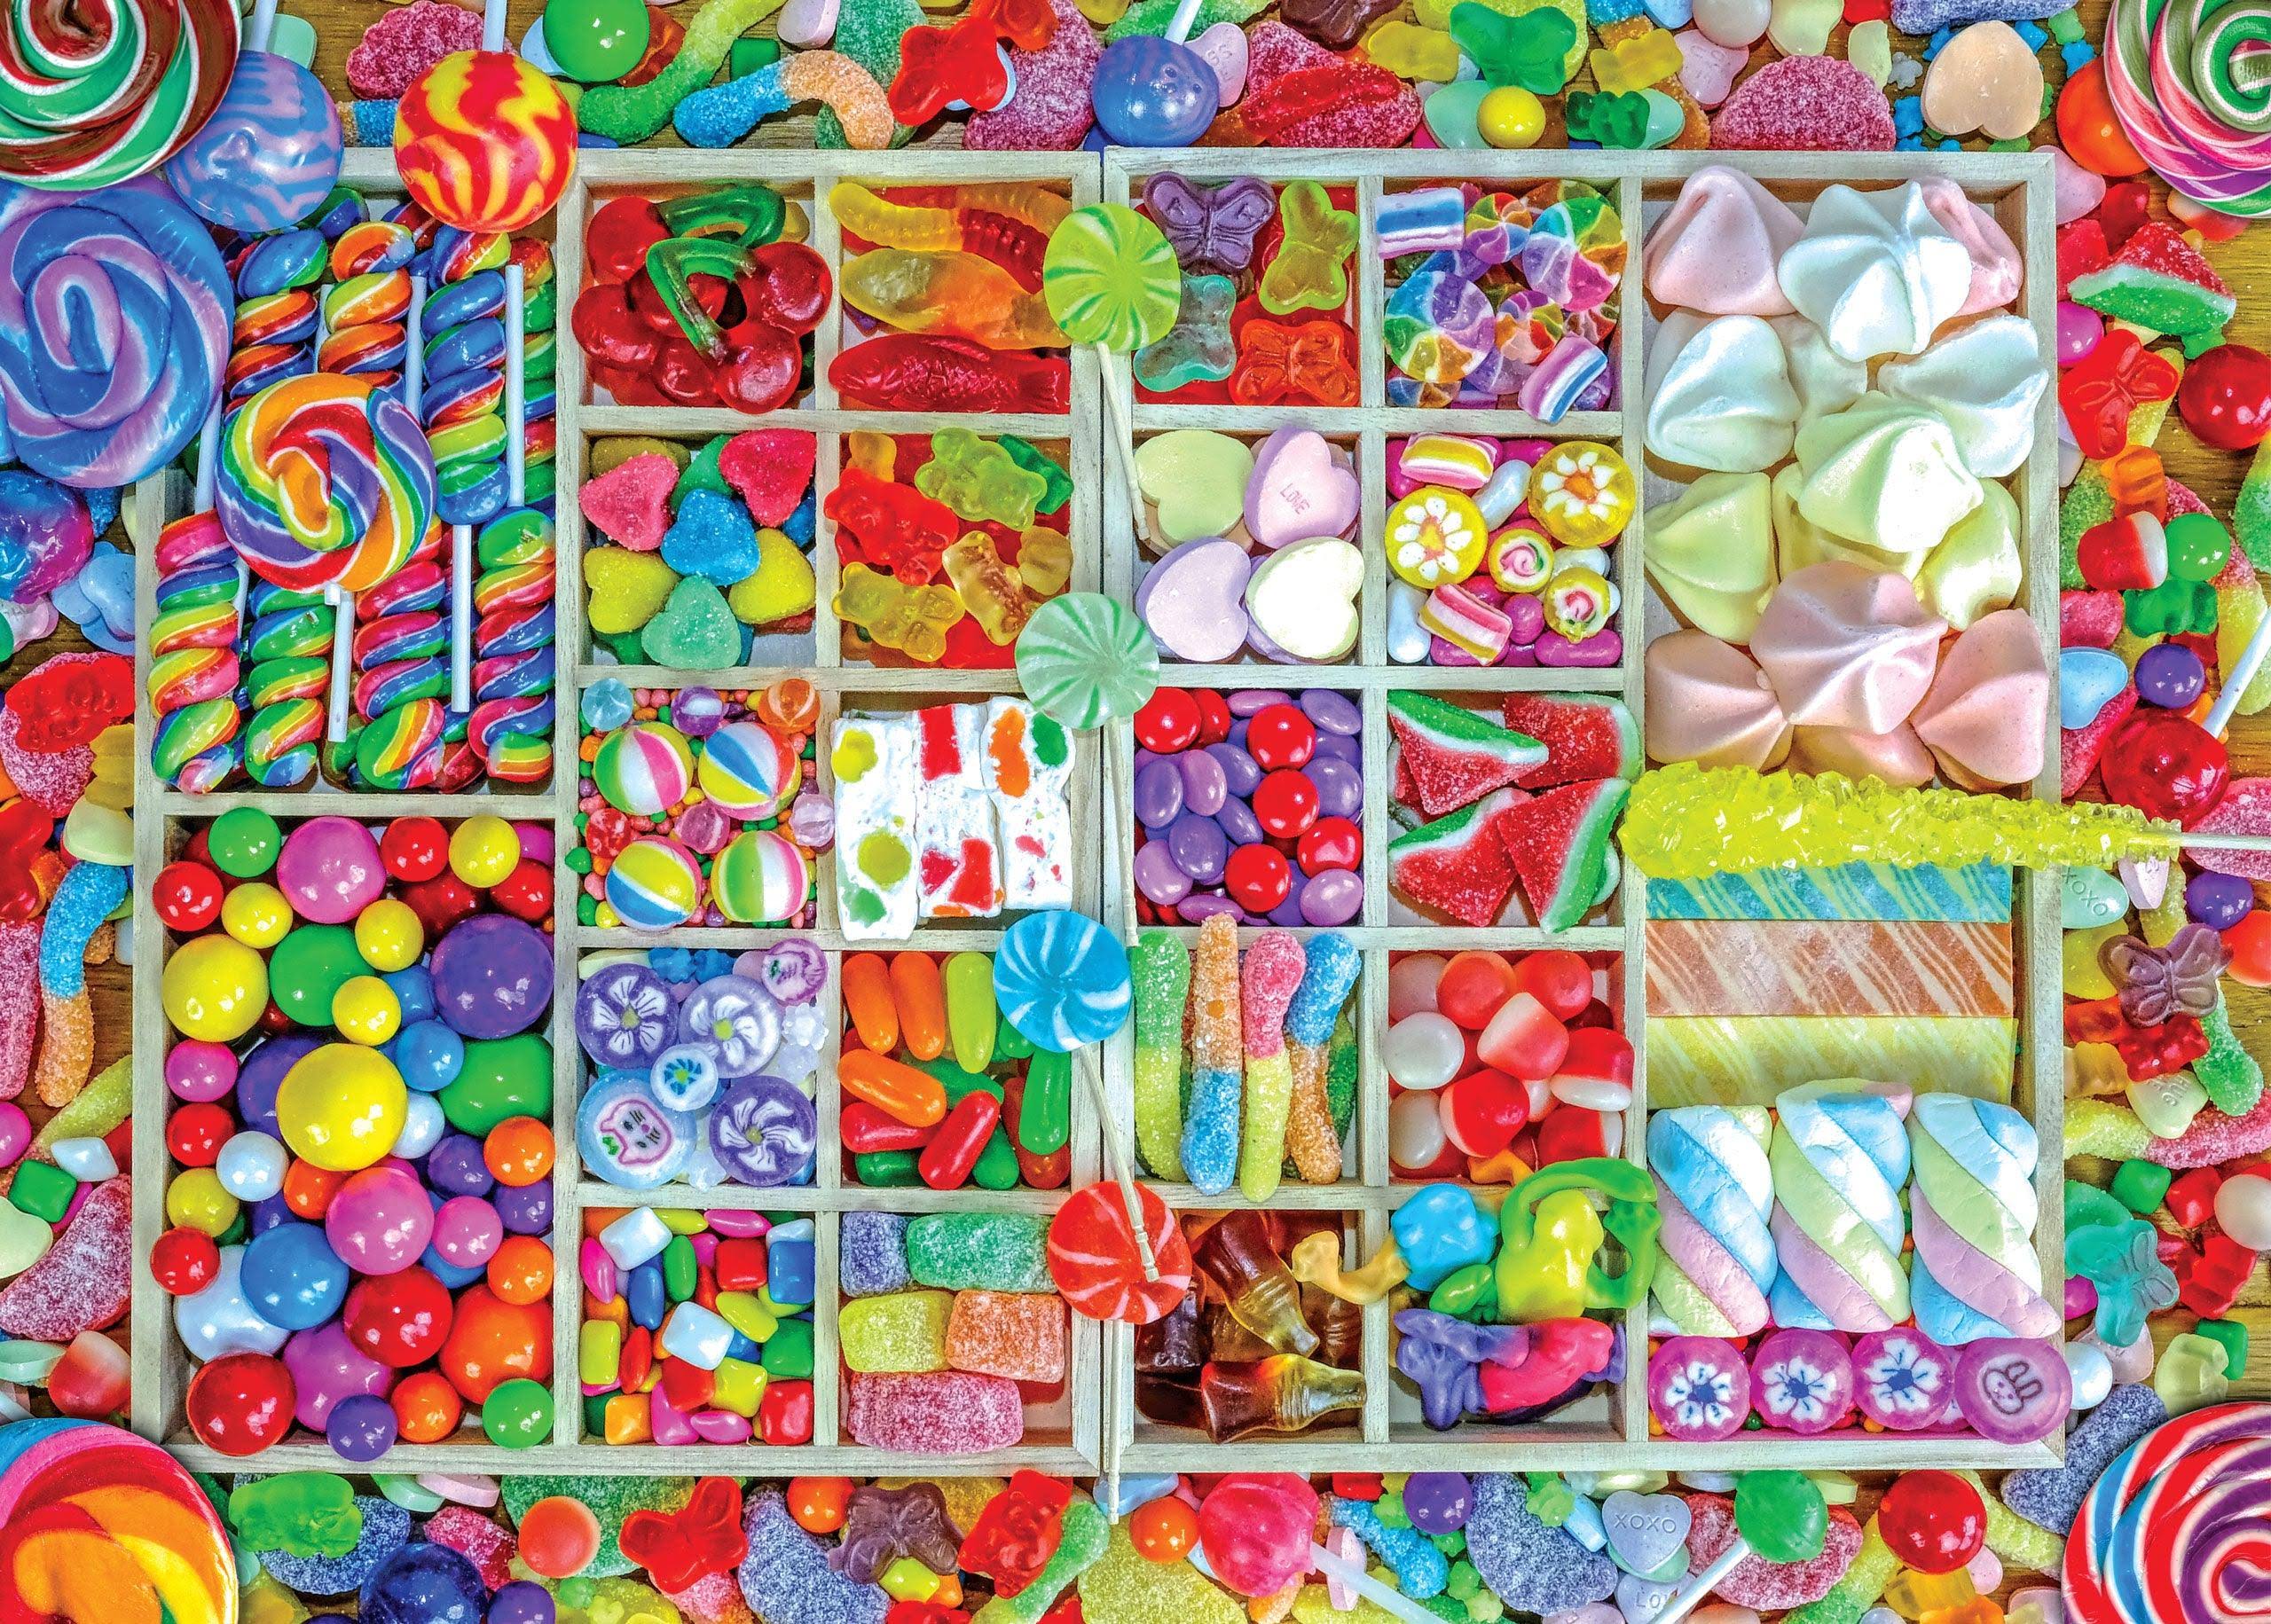 New! Peter Pauper Press Candy Party 1000 Piece Jigsaw Puzzle